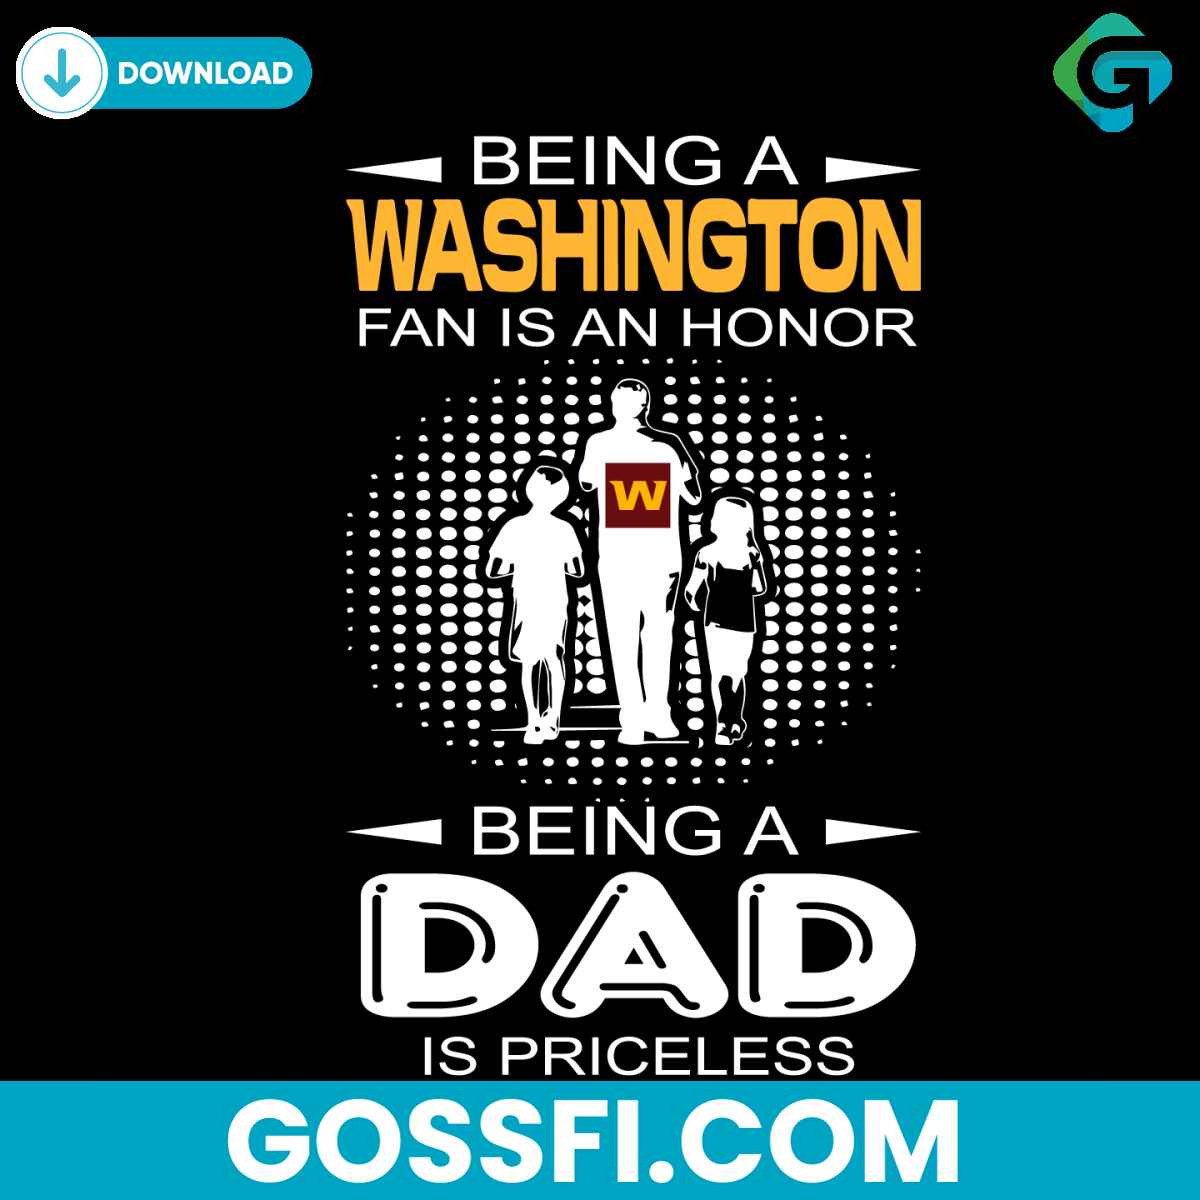 being-a-washington-fan-is-an-honor-being-a-dad-is-priceless-svg